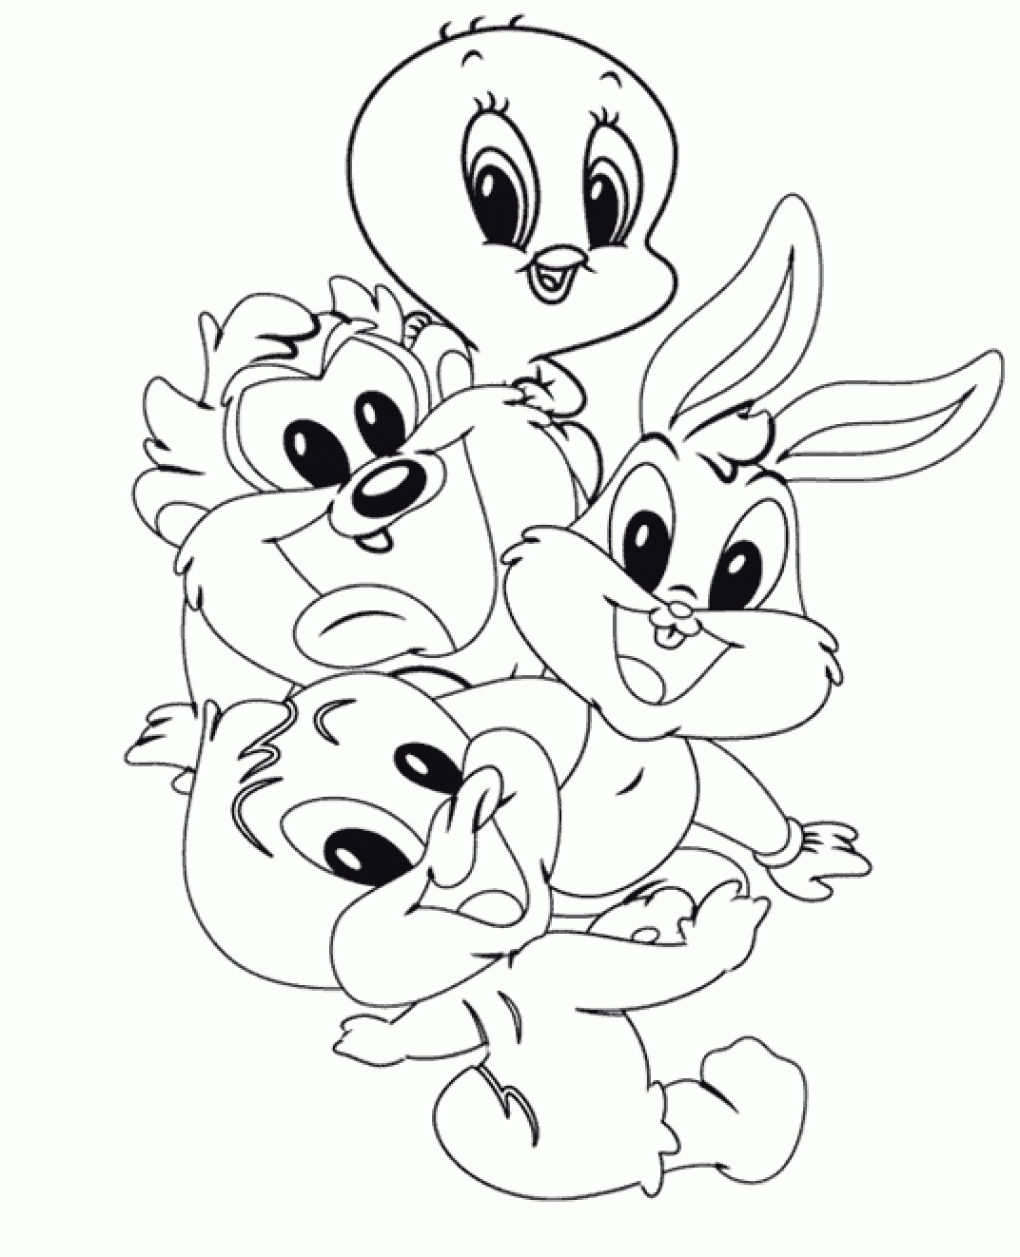 Elmer Fudd Coloring Pages Free Printable Looney Tunes Coloring Pages For Kids